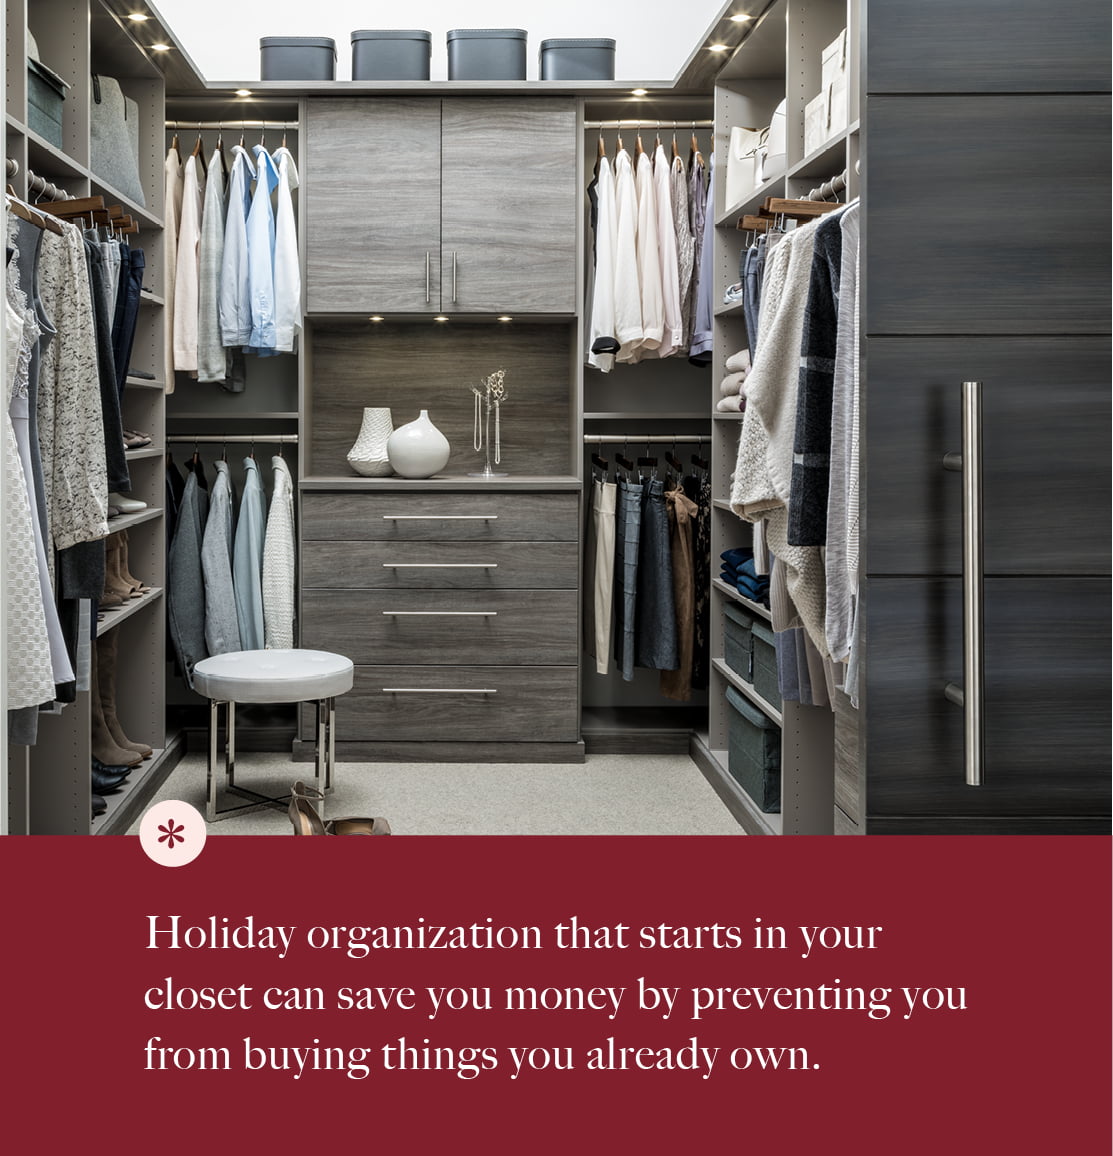 Holiday organization starts in your closet by Inspired Closets